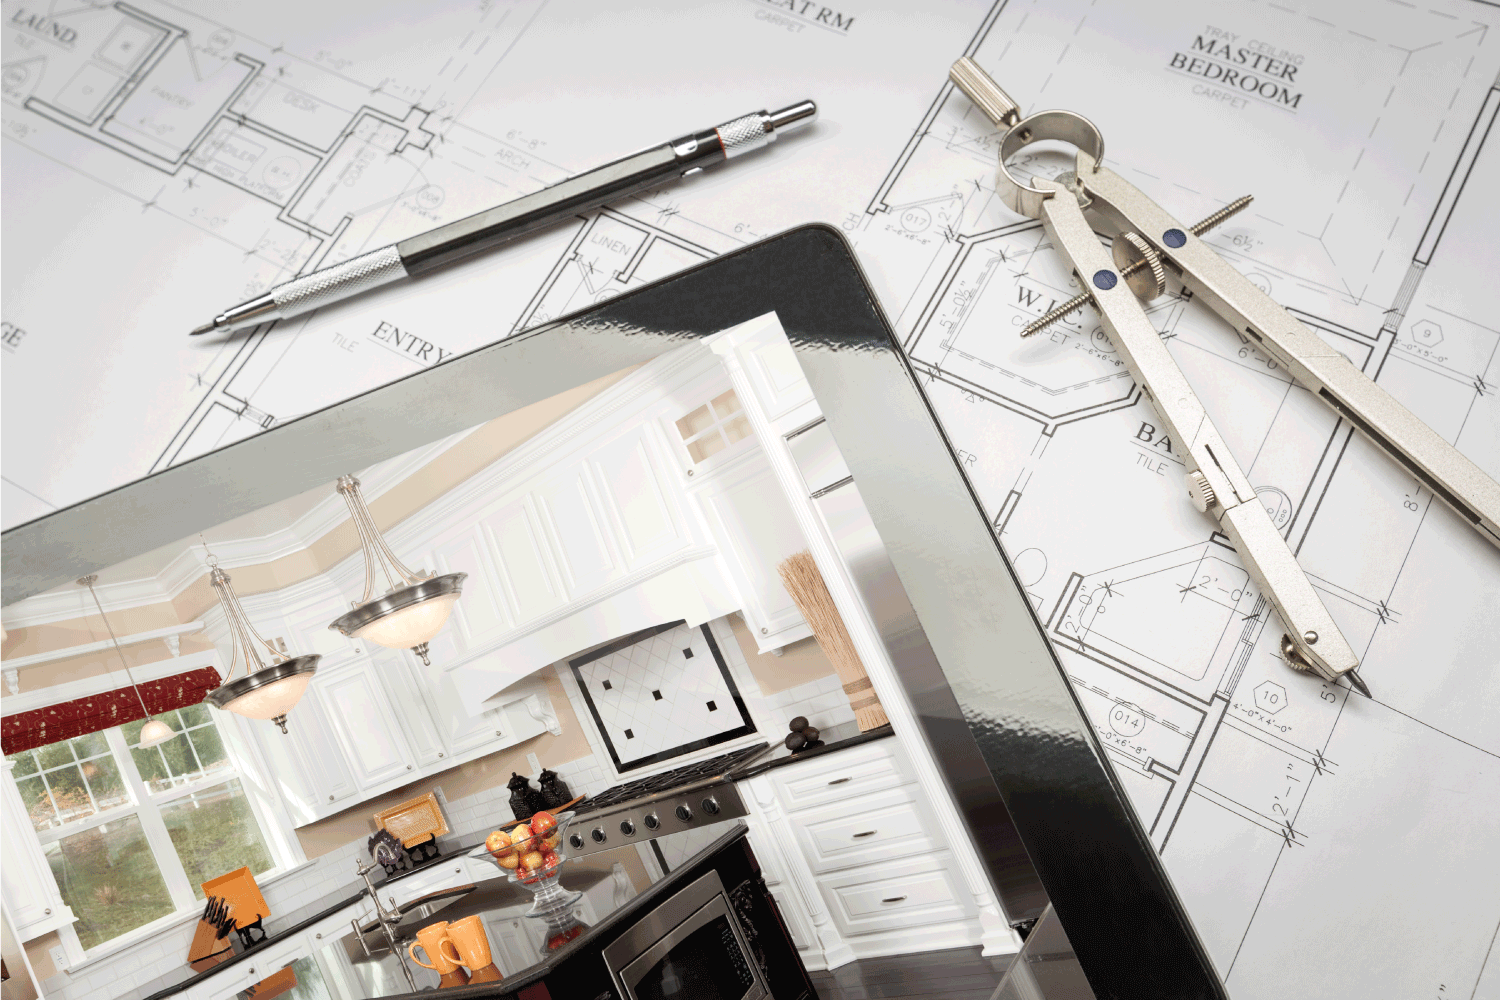 Computer Tablet Showing Kitchen Illustration On House Plans, Pencil, Compass.